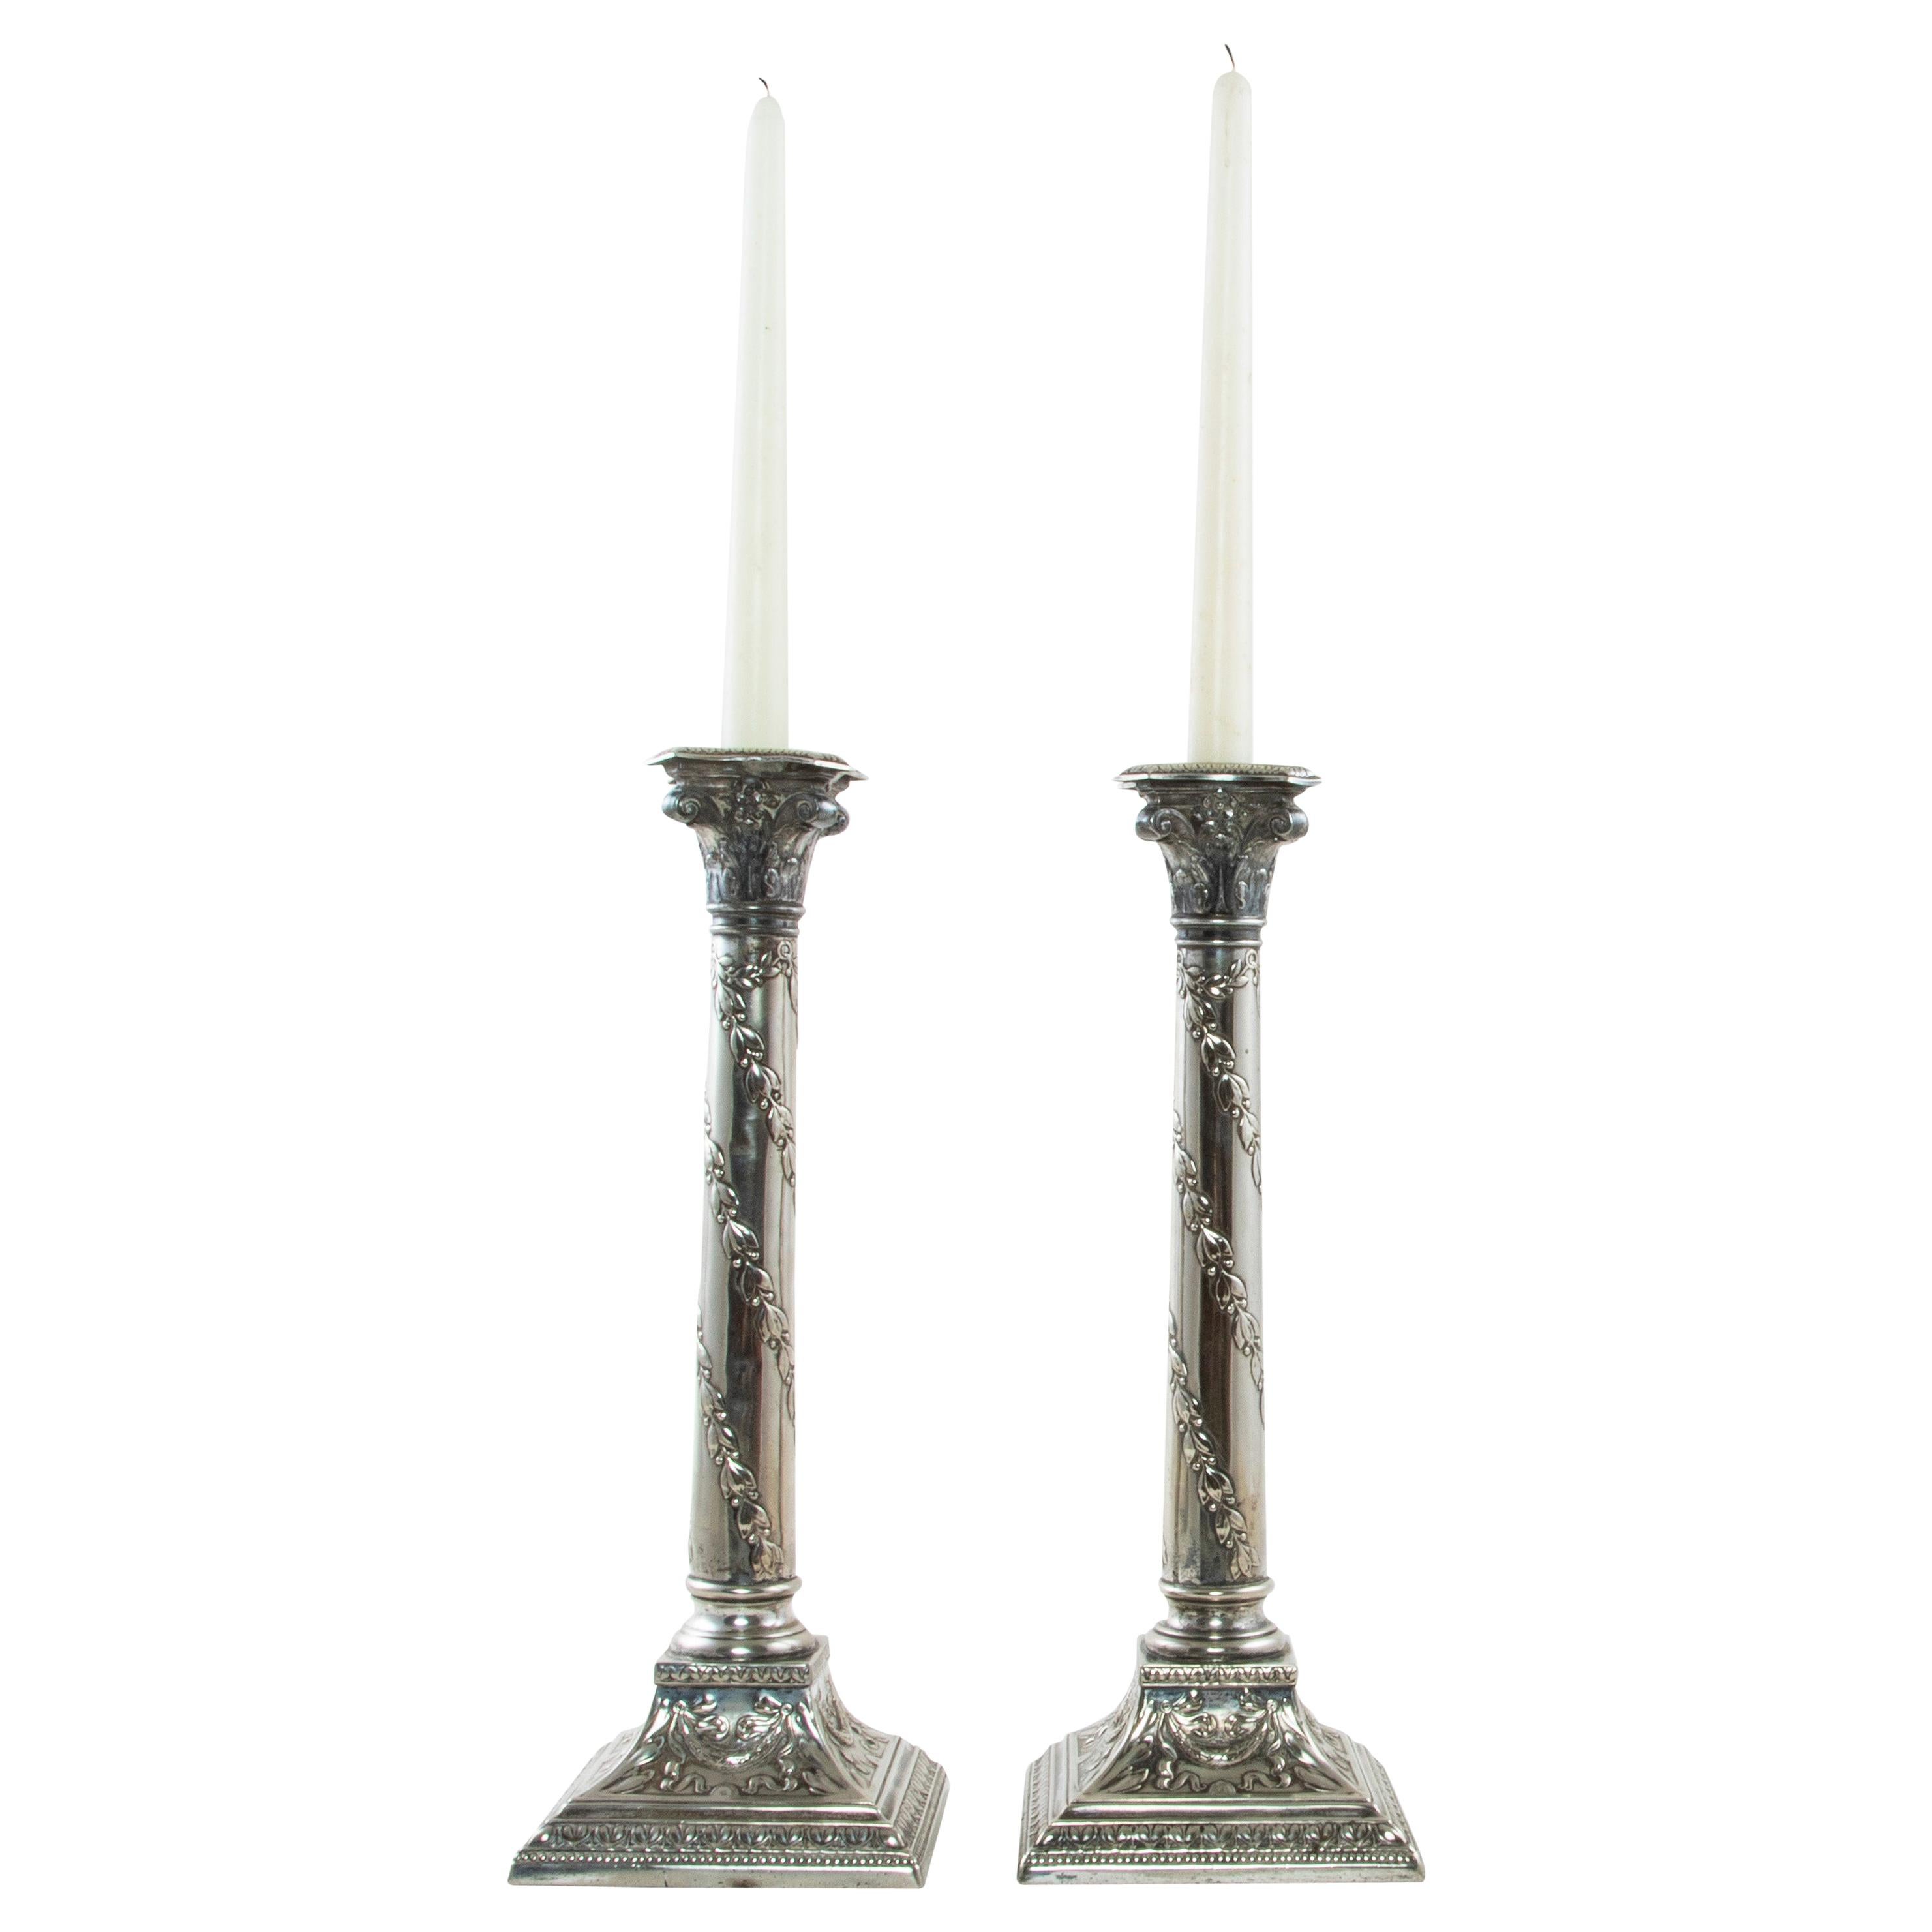 Pair of 19th Century Romanian Silver Plate Candlesticks Stamped Nicolau Bucarest